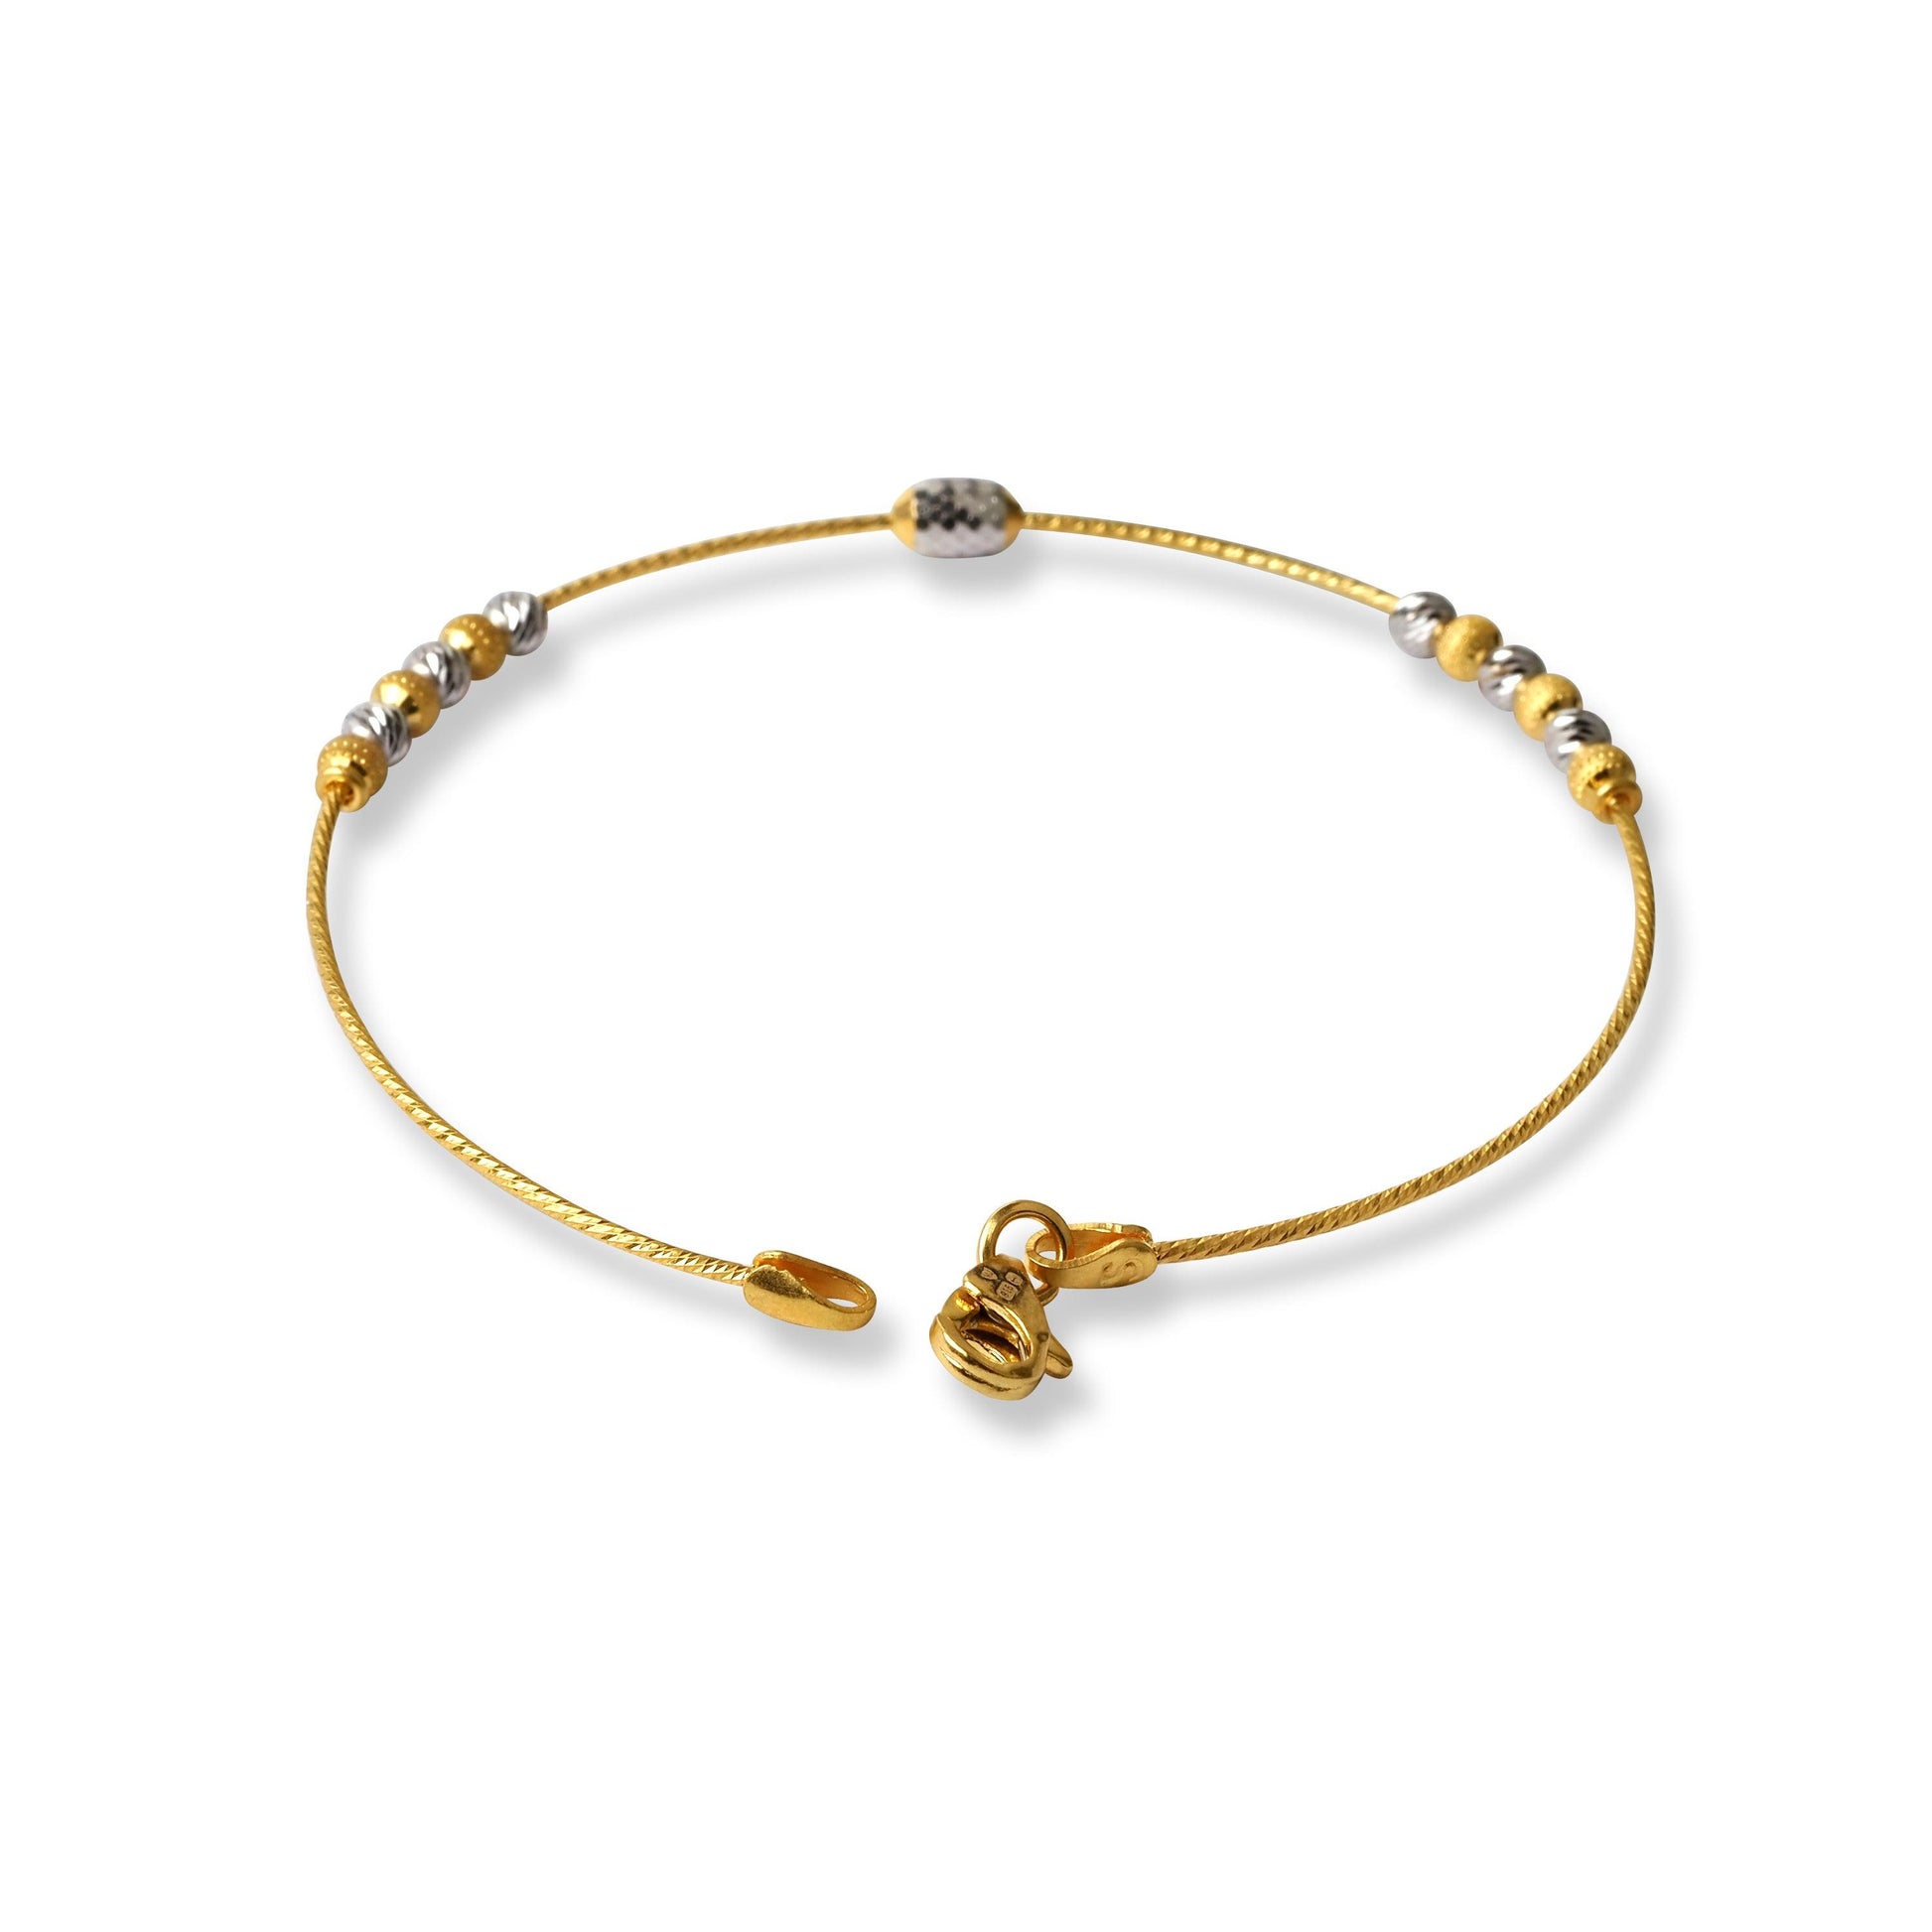 22ct Gold Rhodium Plated Beads Bangle With Rounded Trigger Clasp (4.1g) B-8525 - Minar Jewellers